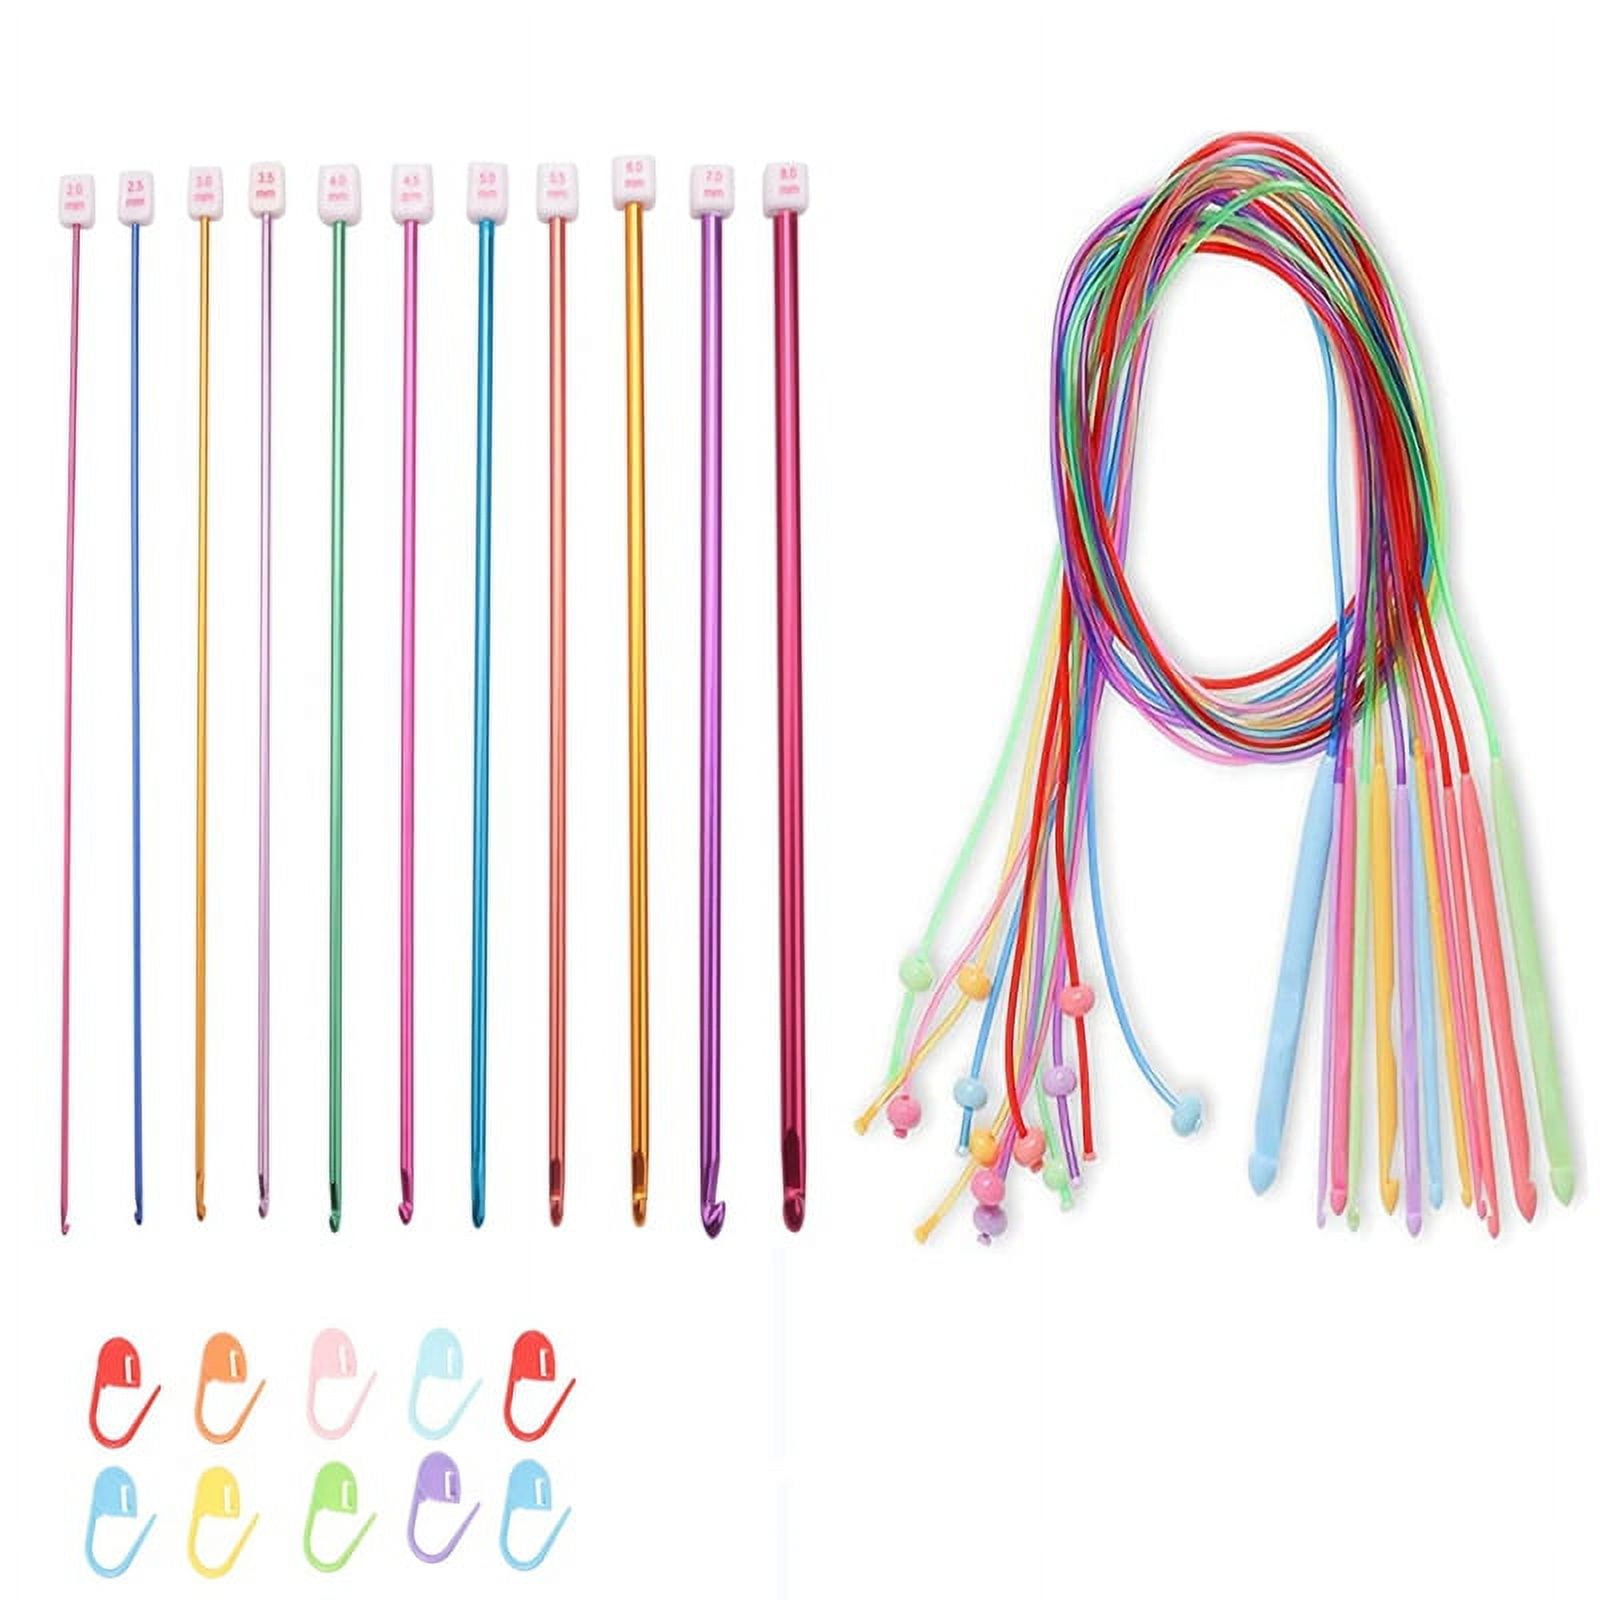 24-inch(60CM) Flexible Afghan Cabled Hooks Kit (3 Free Patterns), 13 US Sizes from D to O (3-12mm),for Tunisian Crocheting, for Beginners and Experts